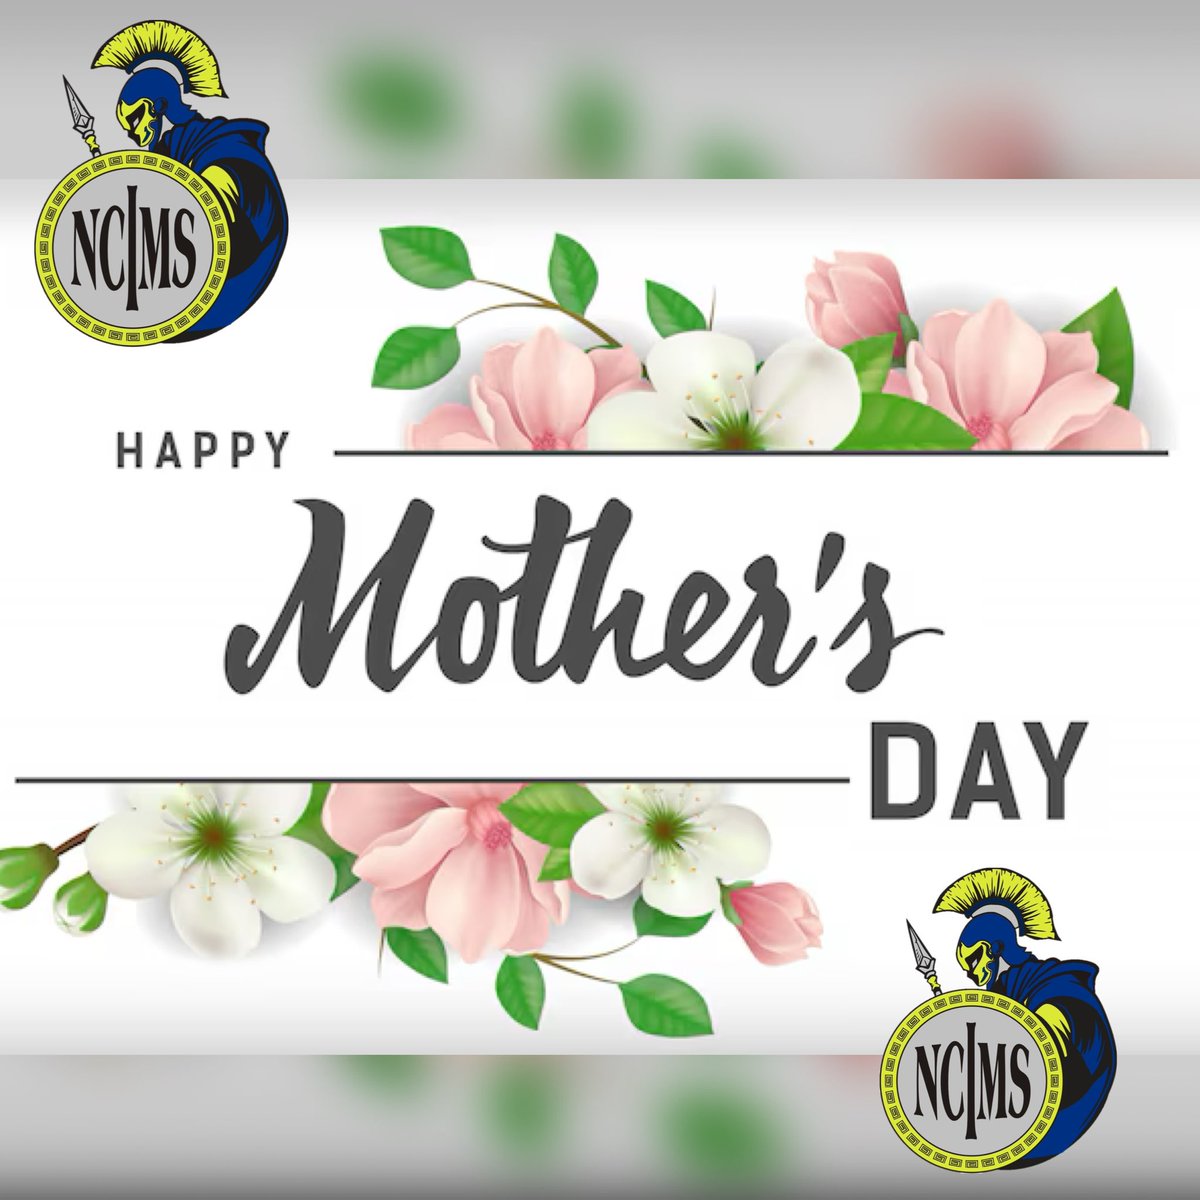 “Wishing a very Happy Mother's Day to the most incredible woman in our life. Thank you for being our rock, mentor, and friend.' #Titans #NCIMS #MothersDayMessage